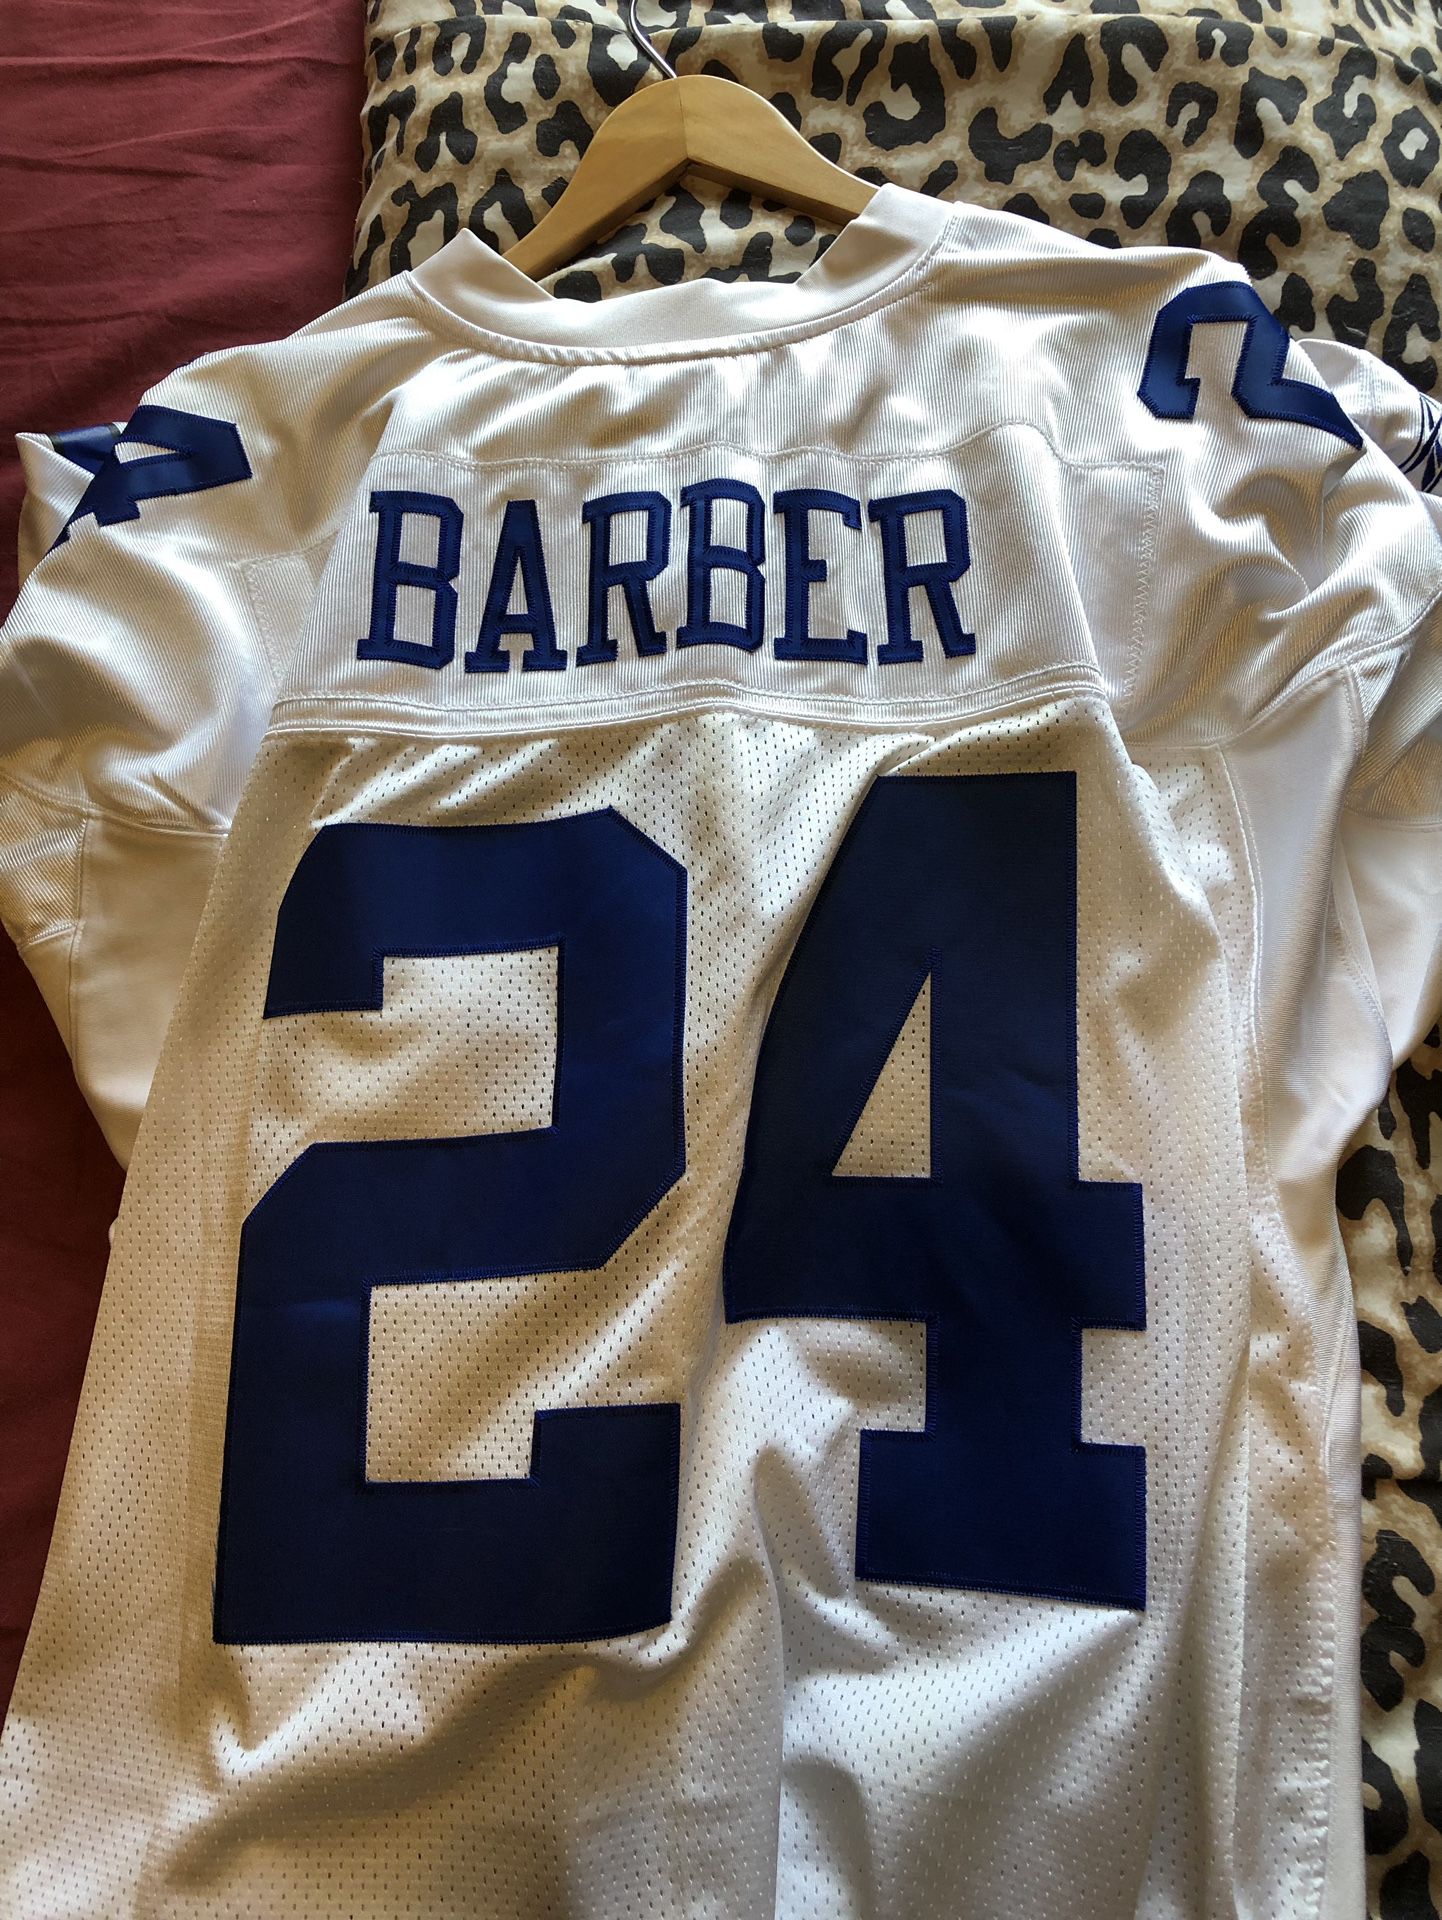 authentic cowboys jersey